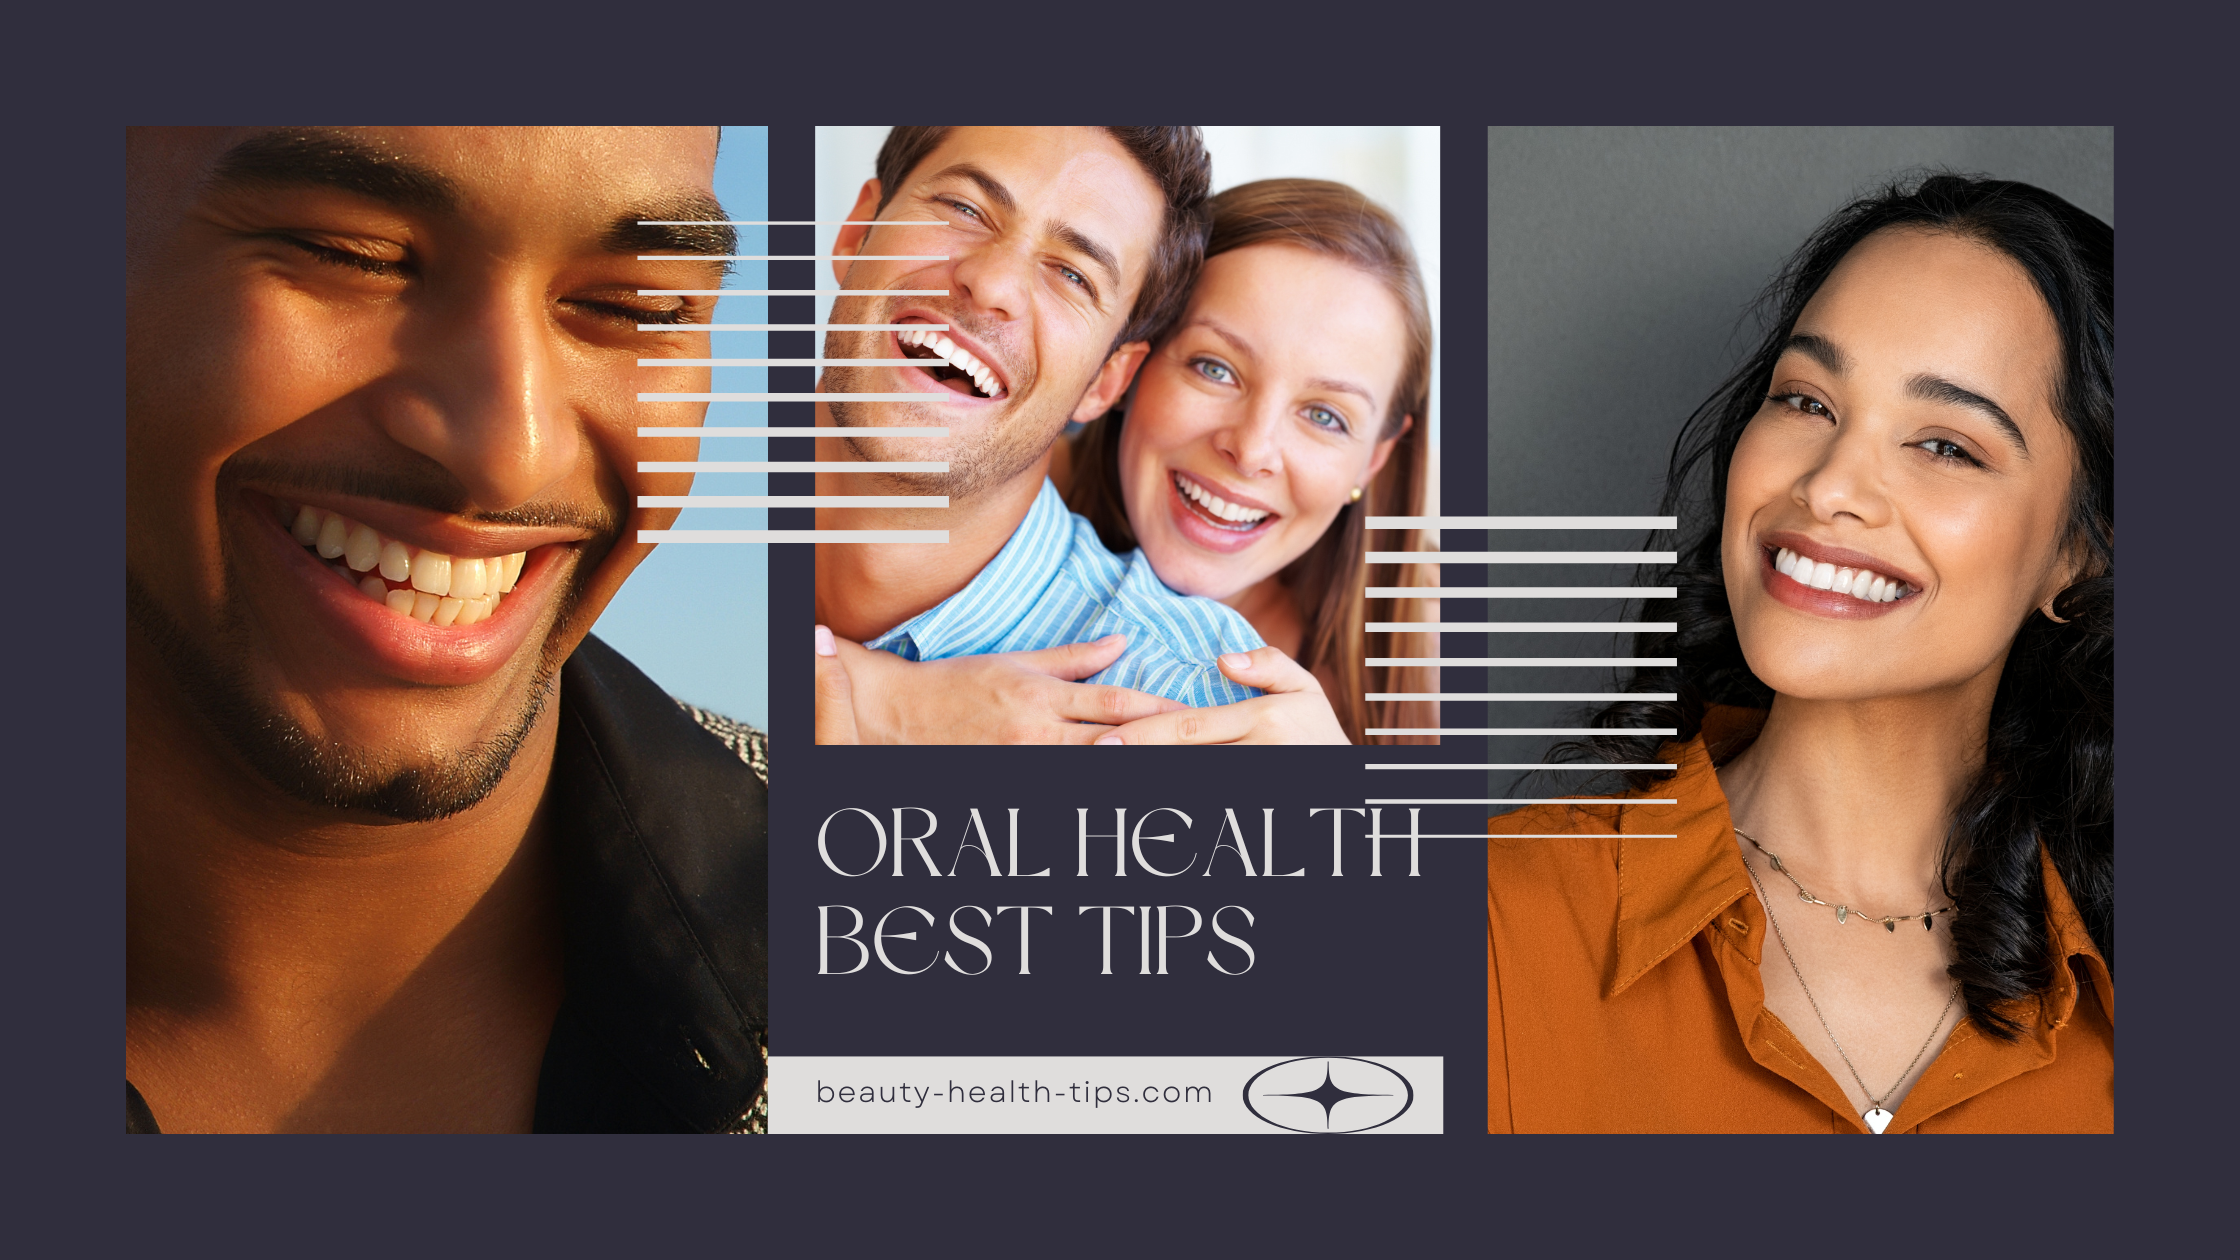 Oral Health: The Best Way to Do it